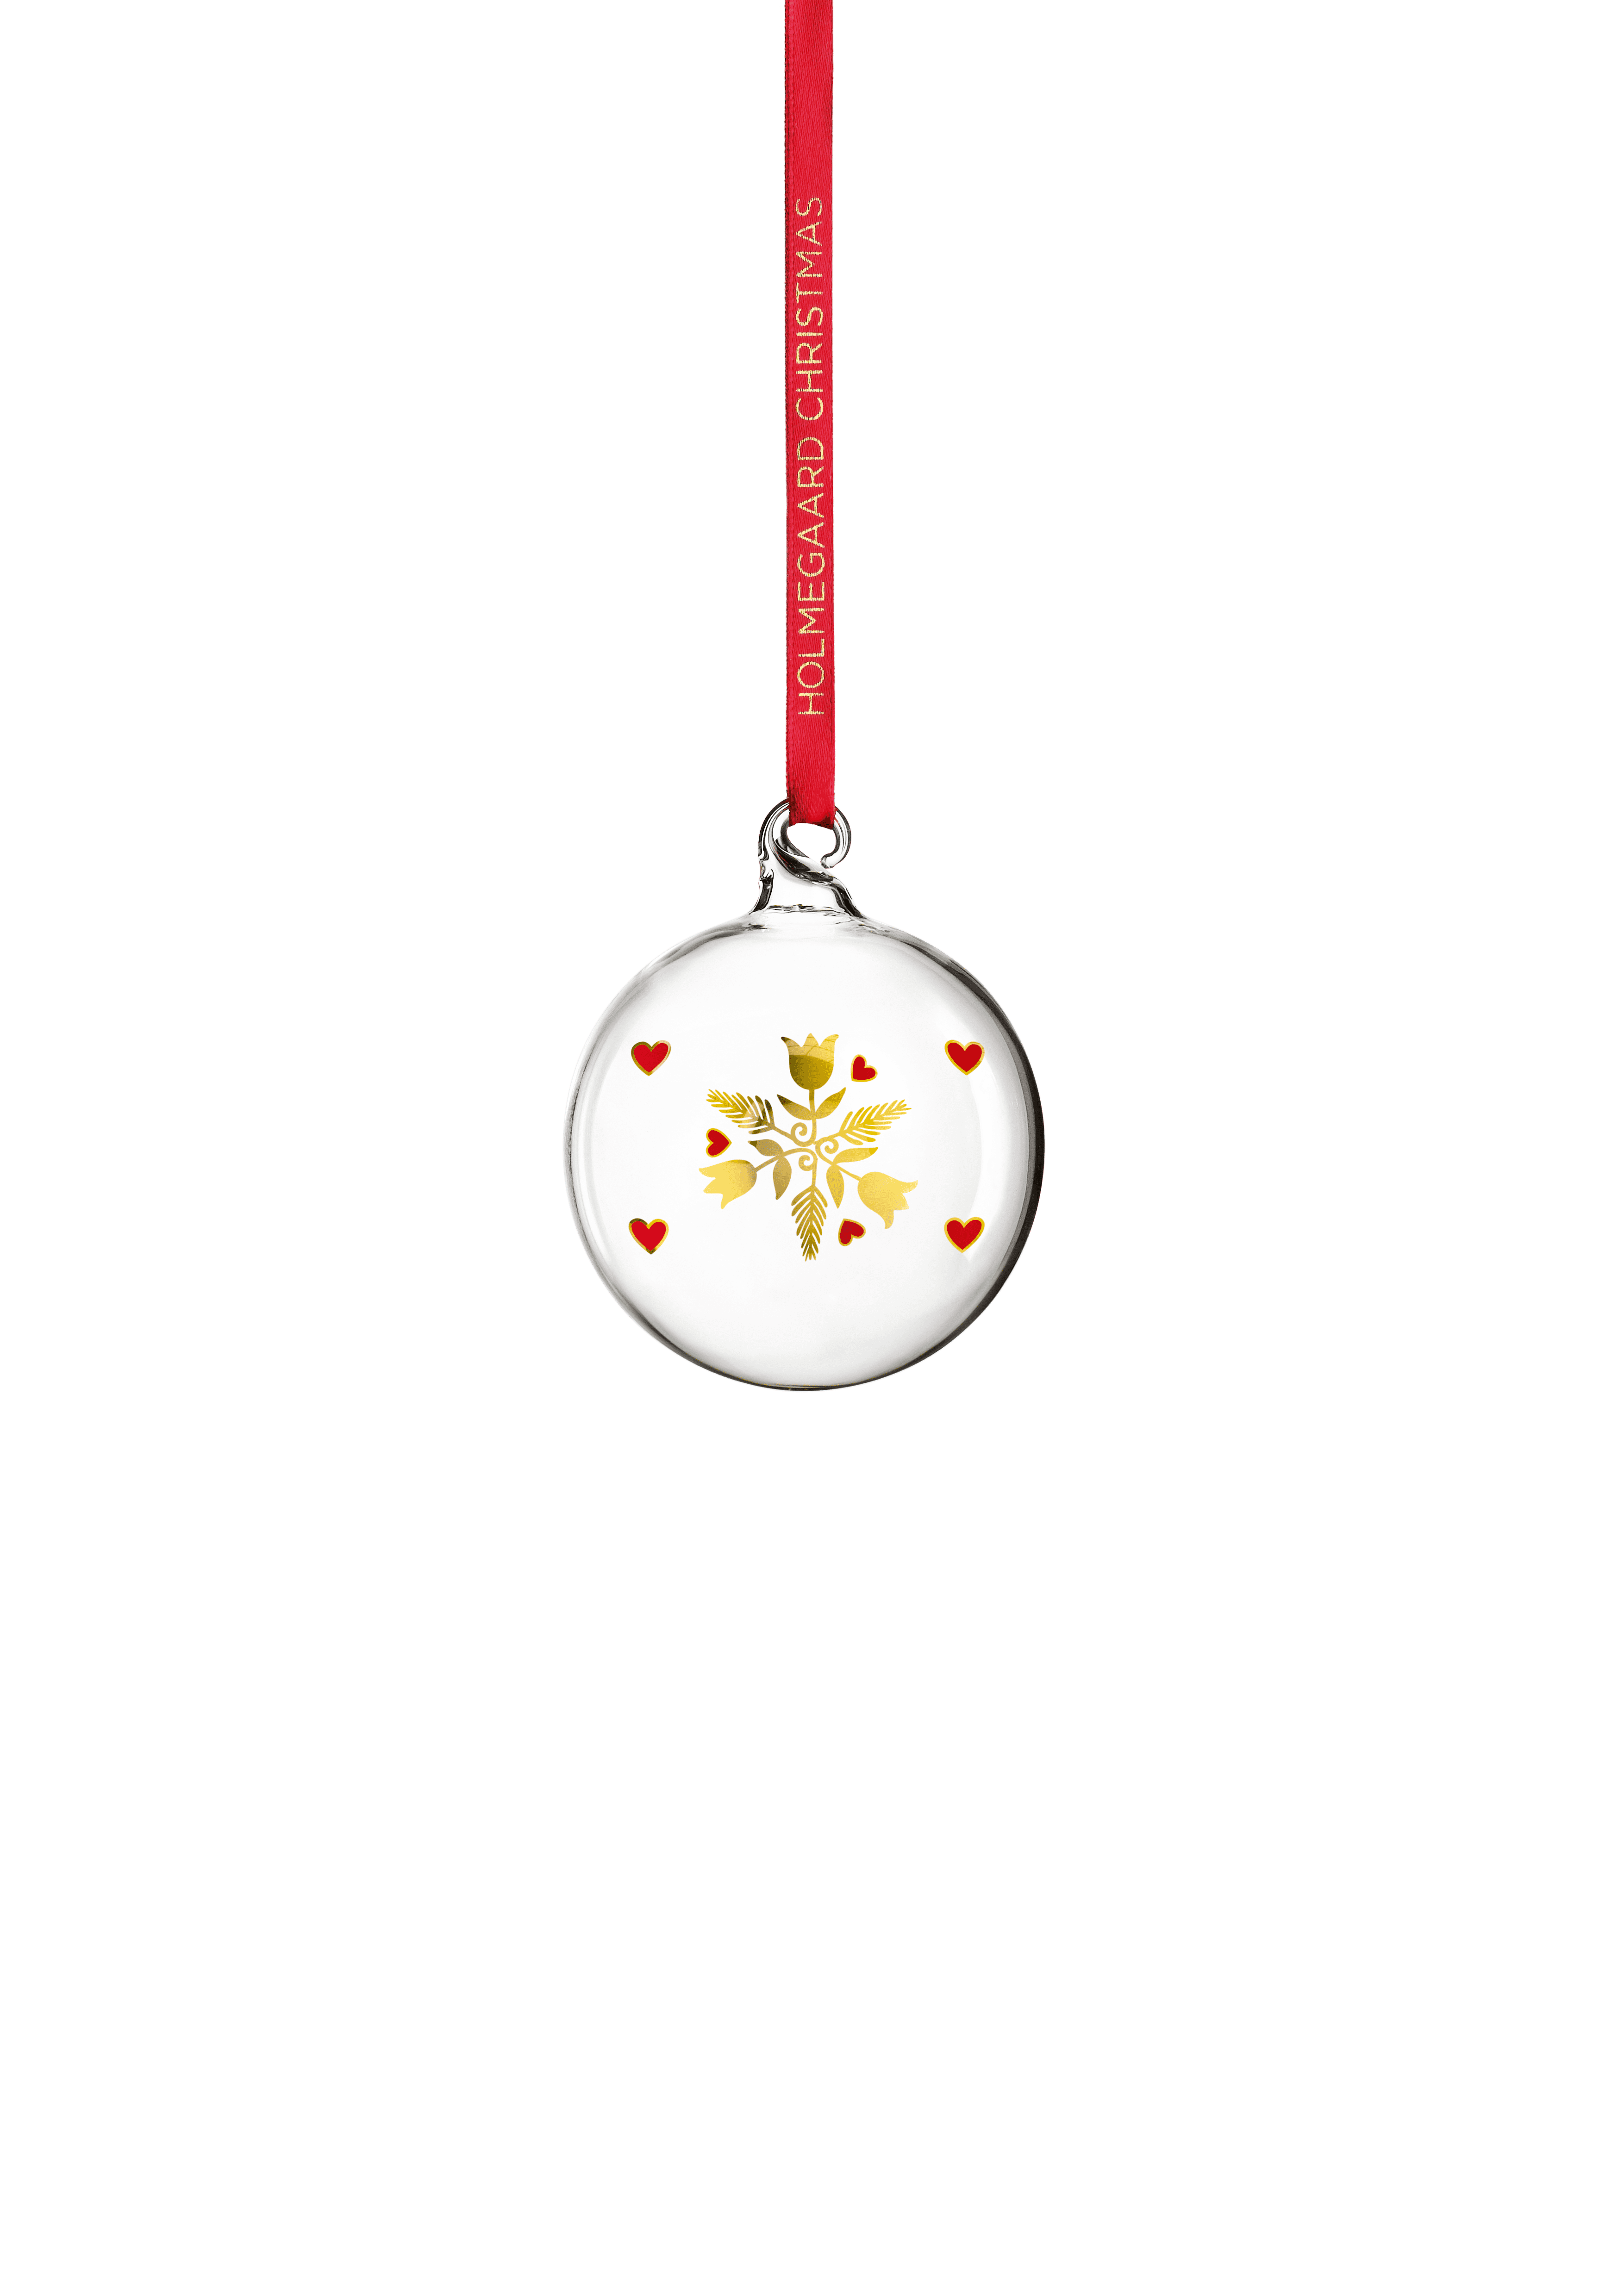 Annual Christmas Bauble 2020 small